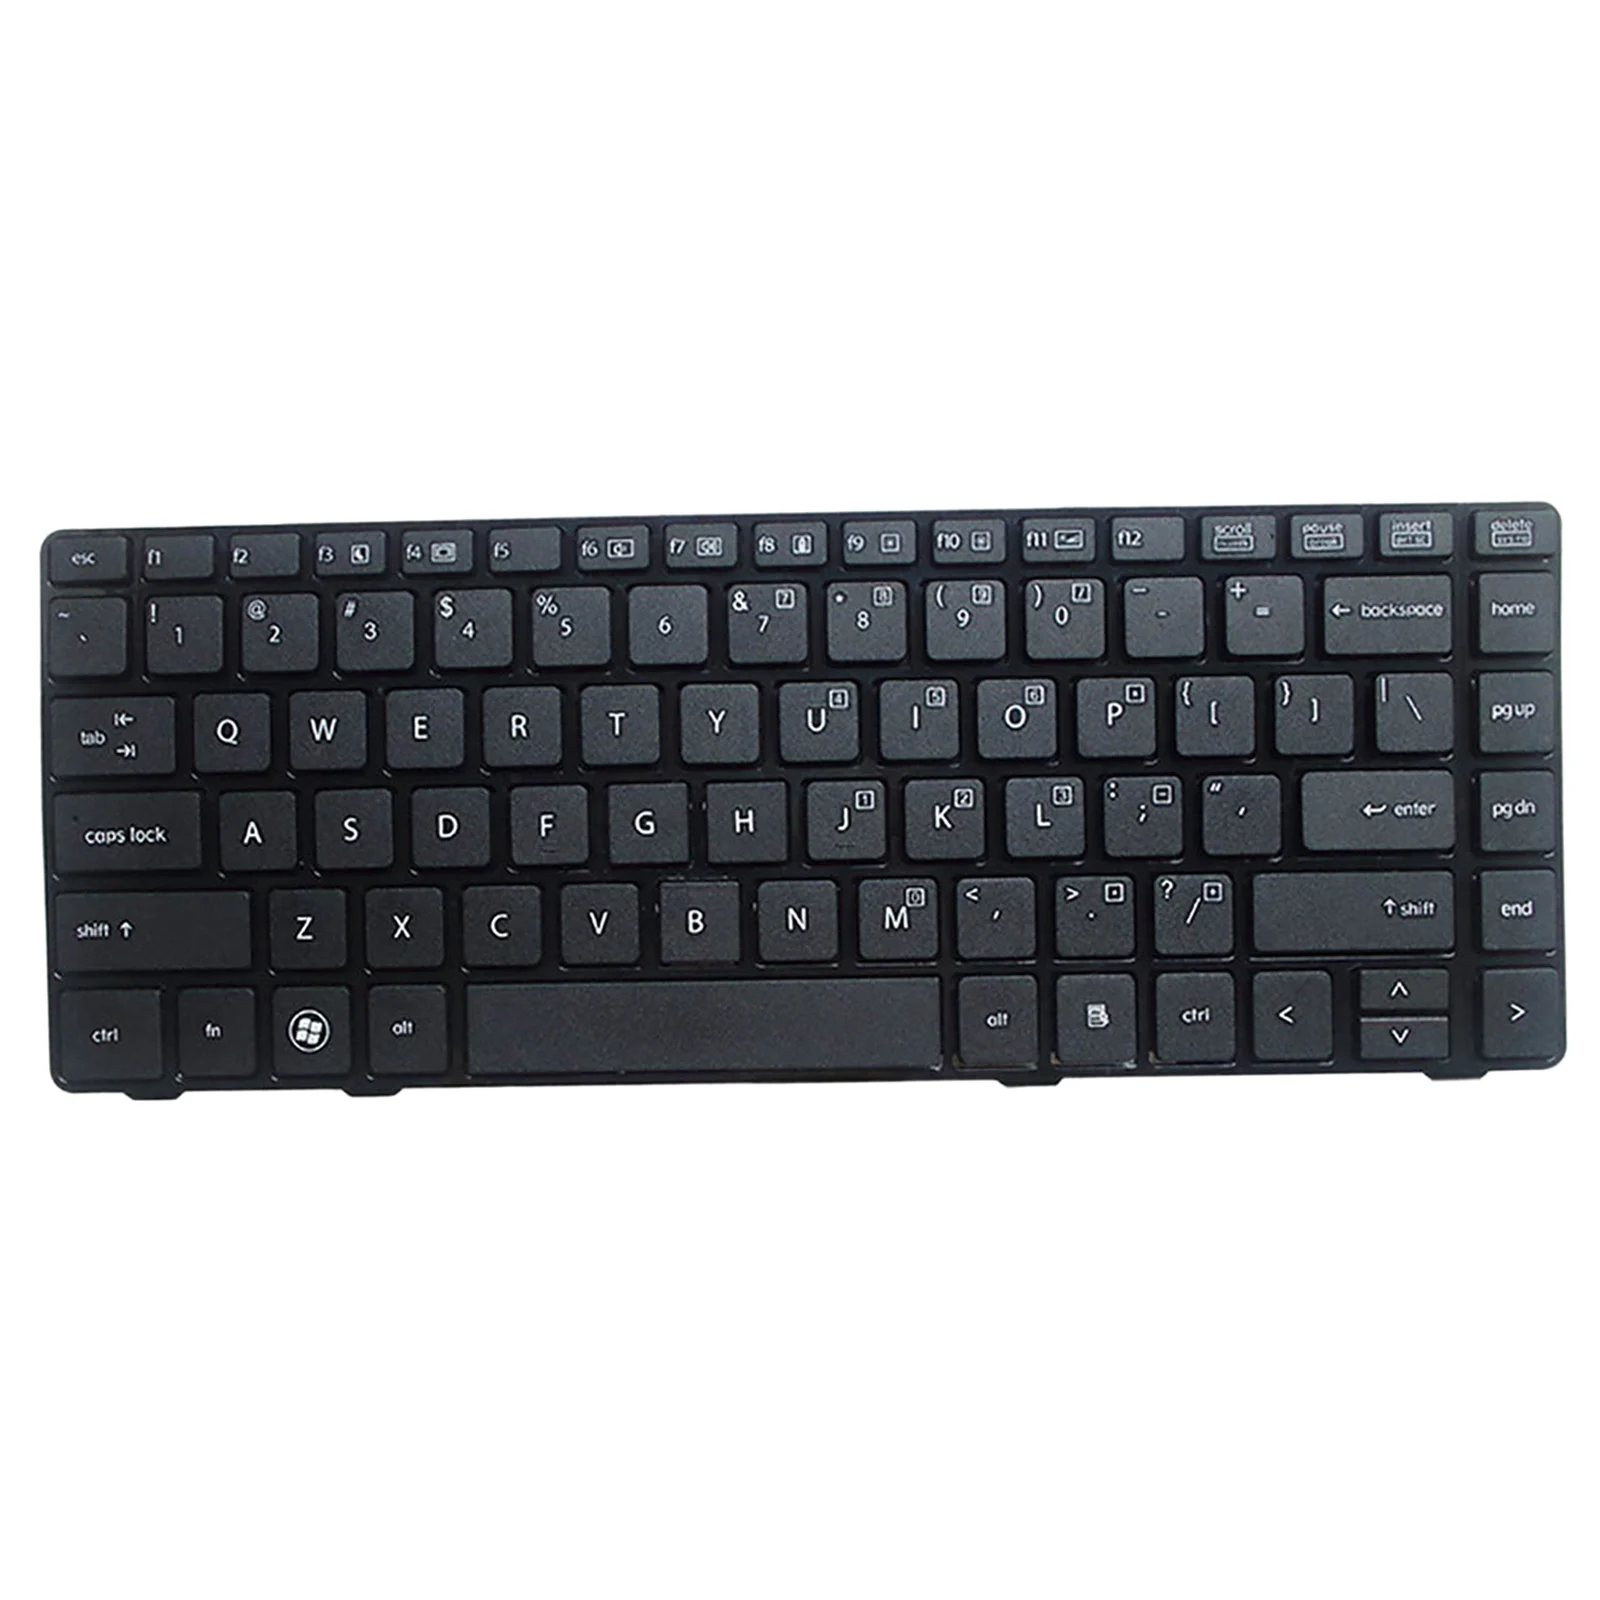 US Layout Keyboard Replace for HP EliteBook 8460p 8470p ProBook 6460b 6465b